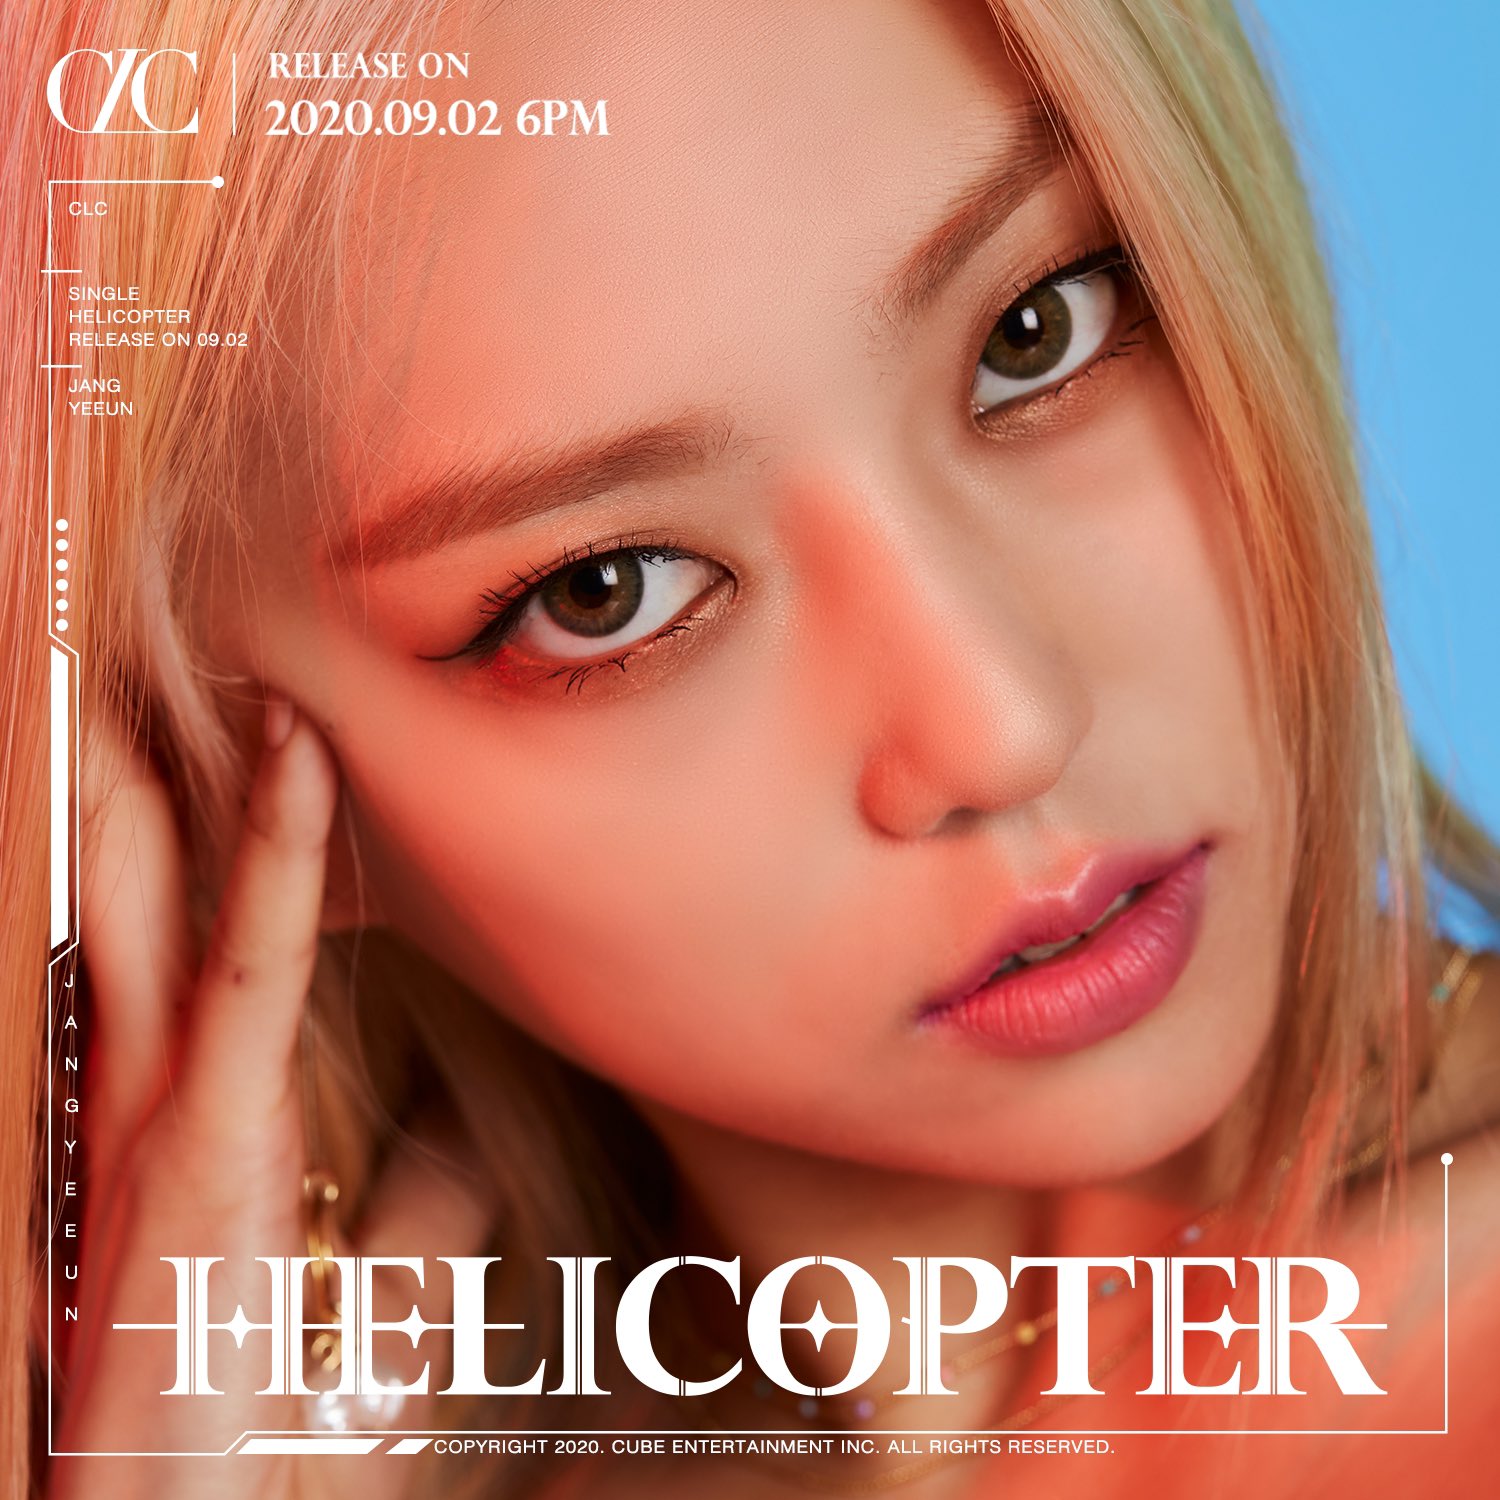 Yeeun (CLC) Profile and Facts (Updated!)